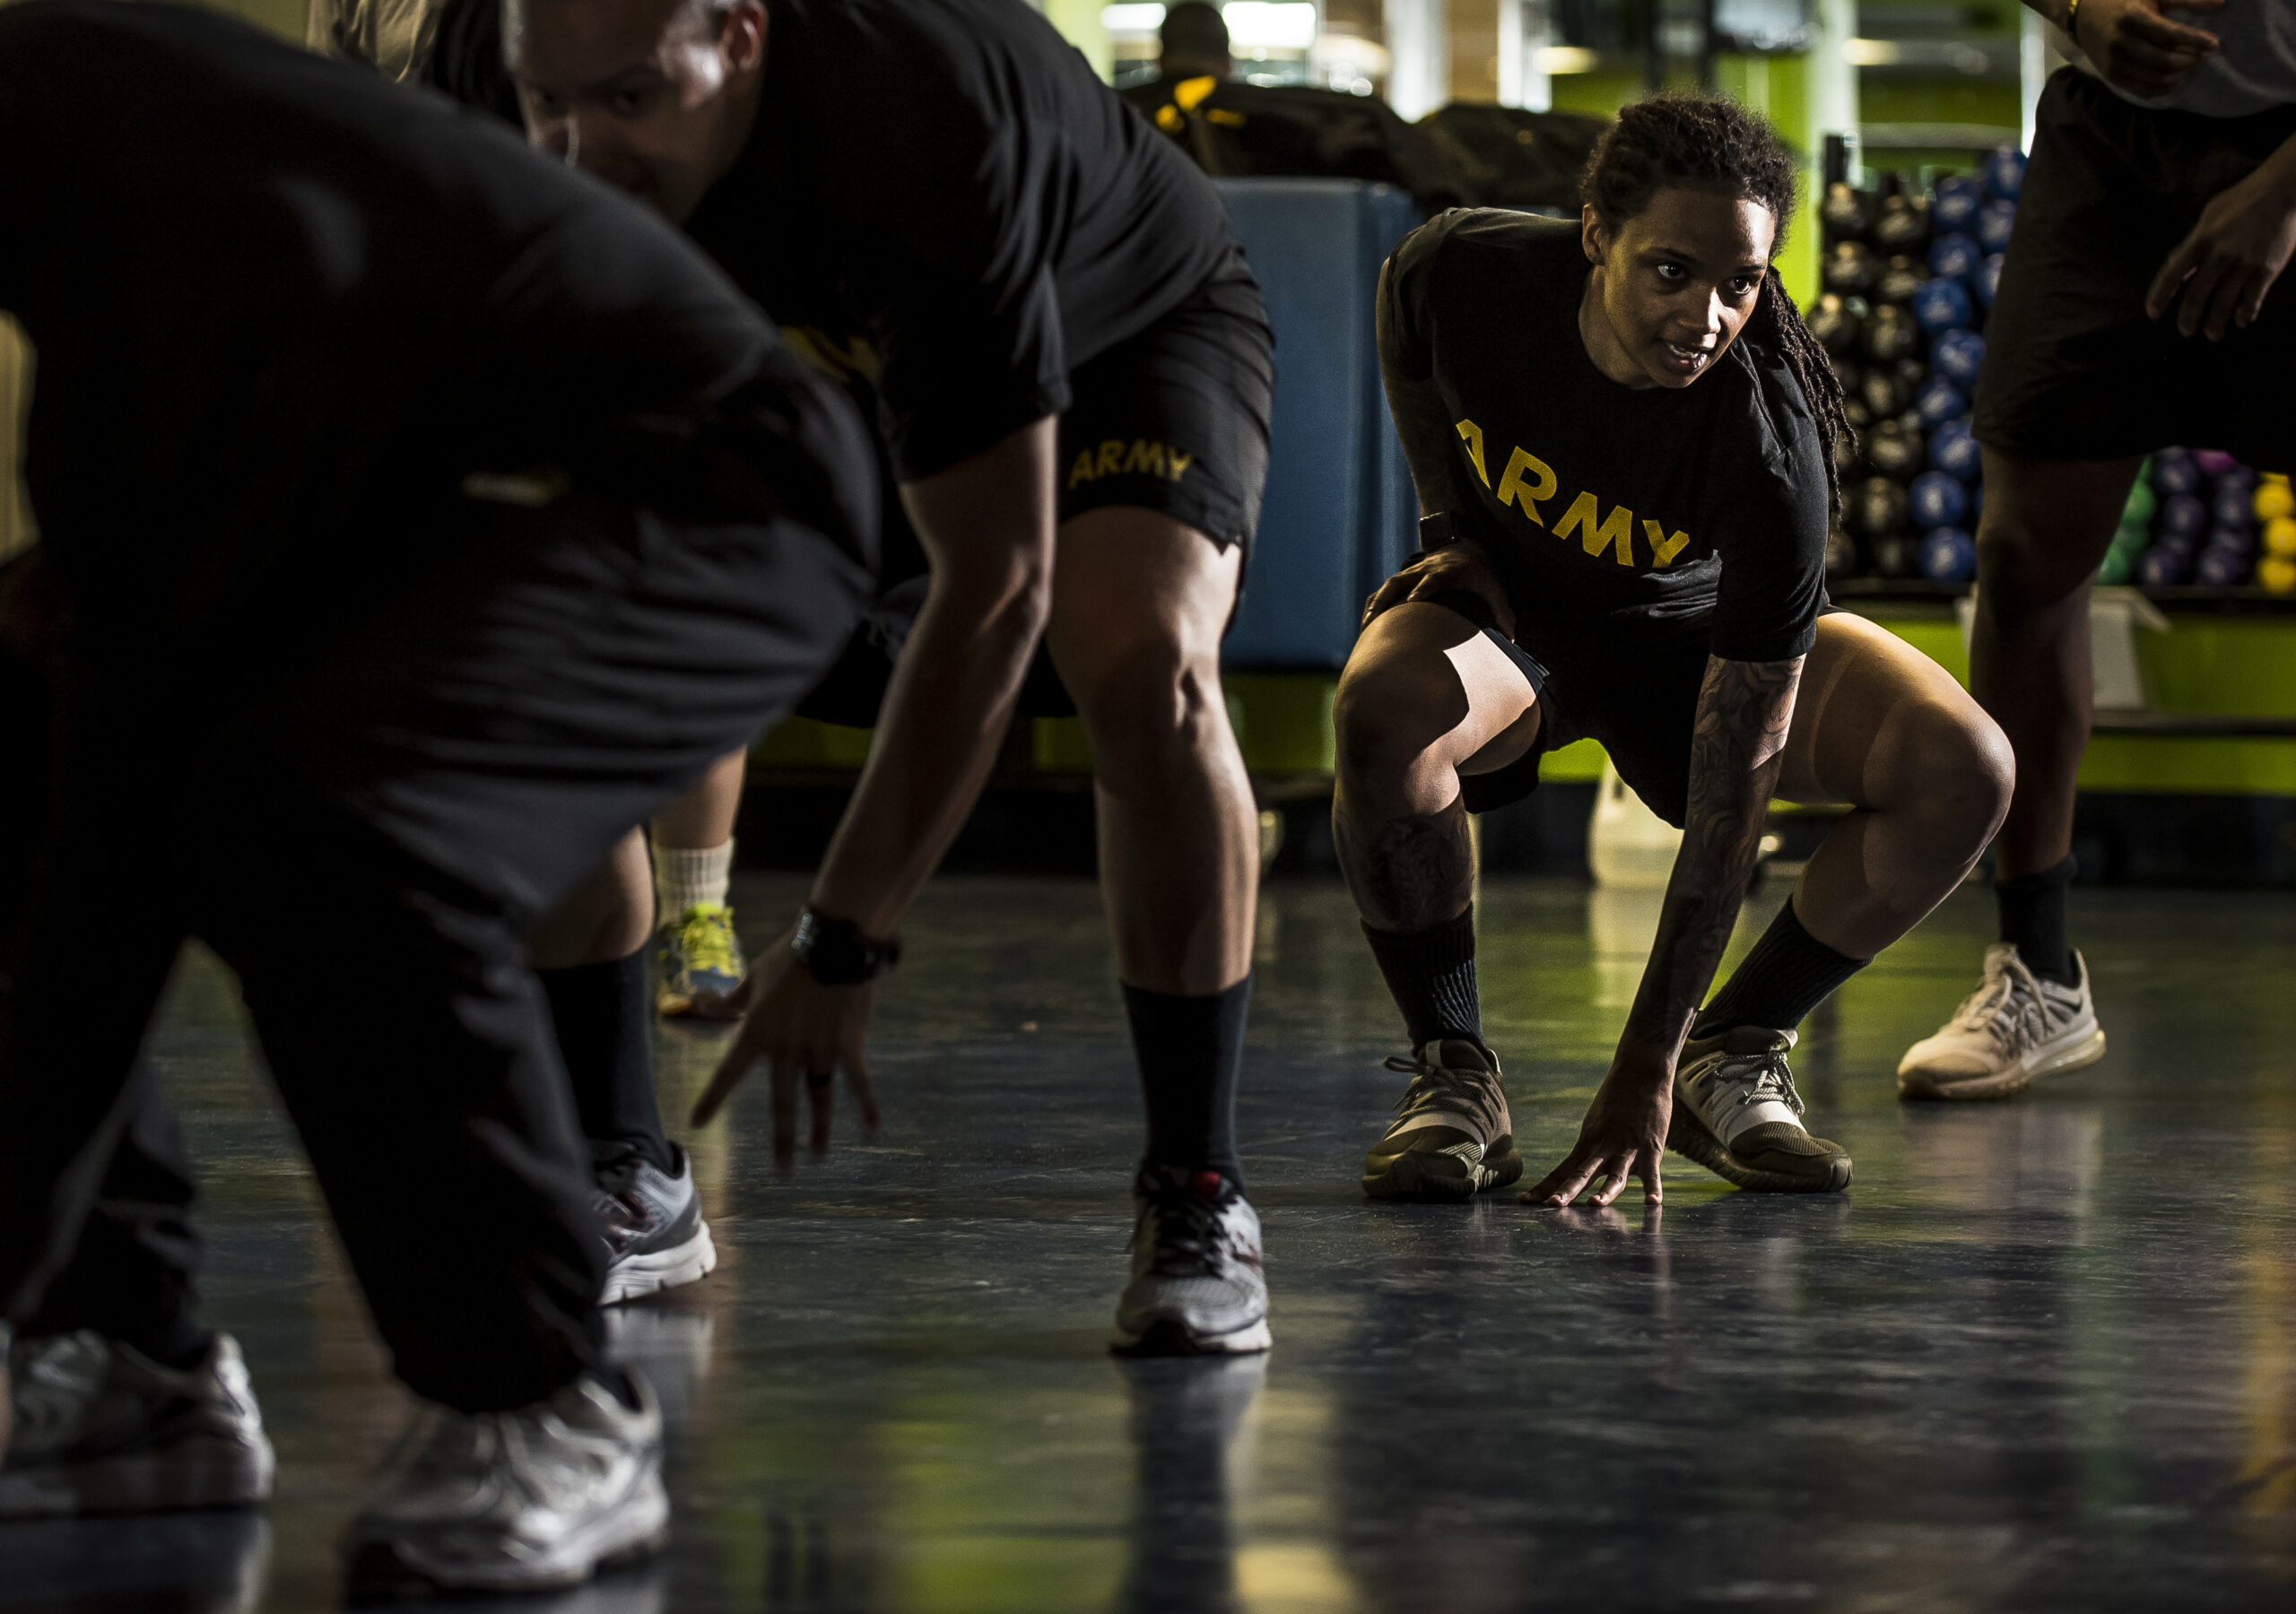 U.S. Army Reserve Soldiers from the 200th Military Police Command participate in a Zumba fitness class during a Performance Triad program organized by the command and hosted on Fort Meade, Maryland, May 9, 2017. The three-week fitness program took place from May 5-25 to help Soldiers who had either failed the Army Physical Fitness Test or had been on the Army Body Fat Composition program. The camp focused on the triad of overall health: physical fitness, nutrition and sleep, by providing education and personalized coaching to Soldiers in all three of those phases of life and more. (U.S. Army Reserve photo by Master Sgt. Michel Sauret)